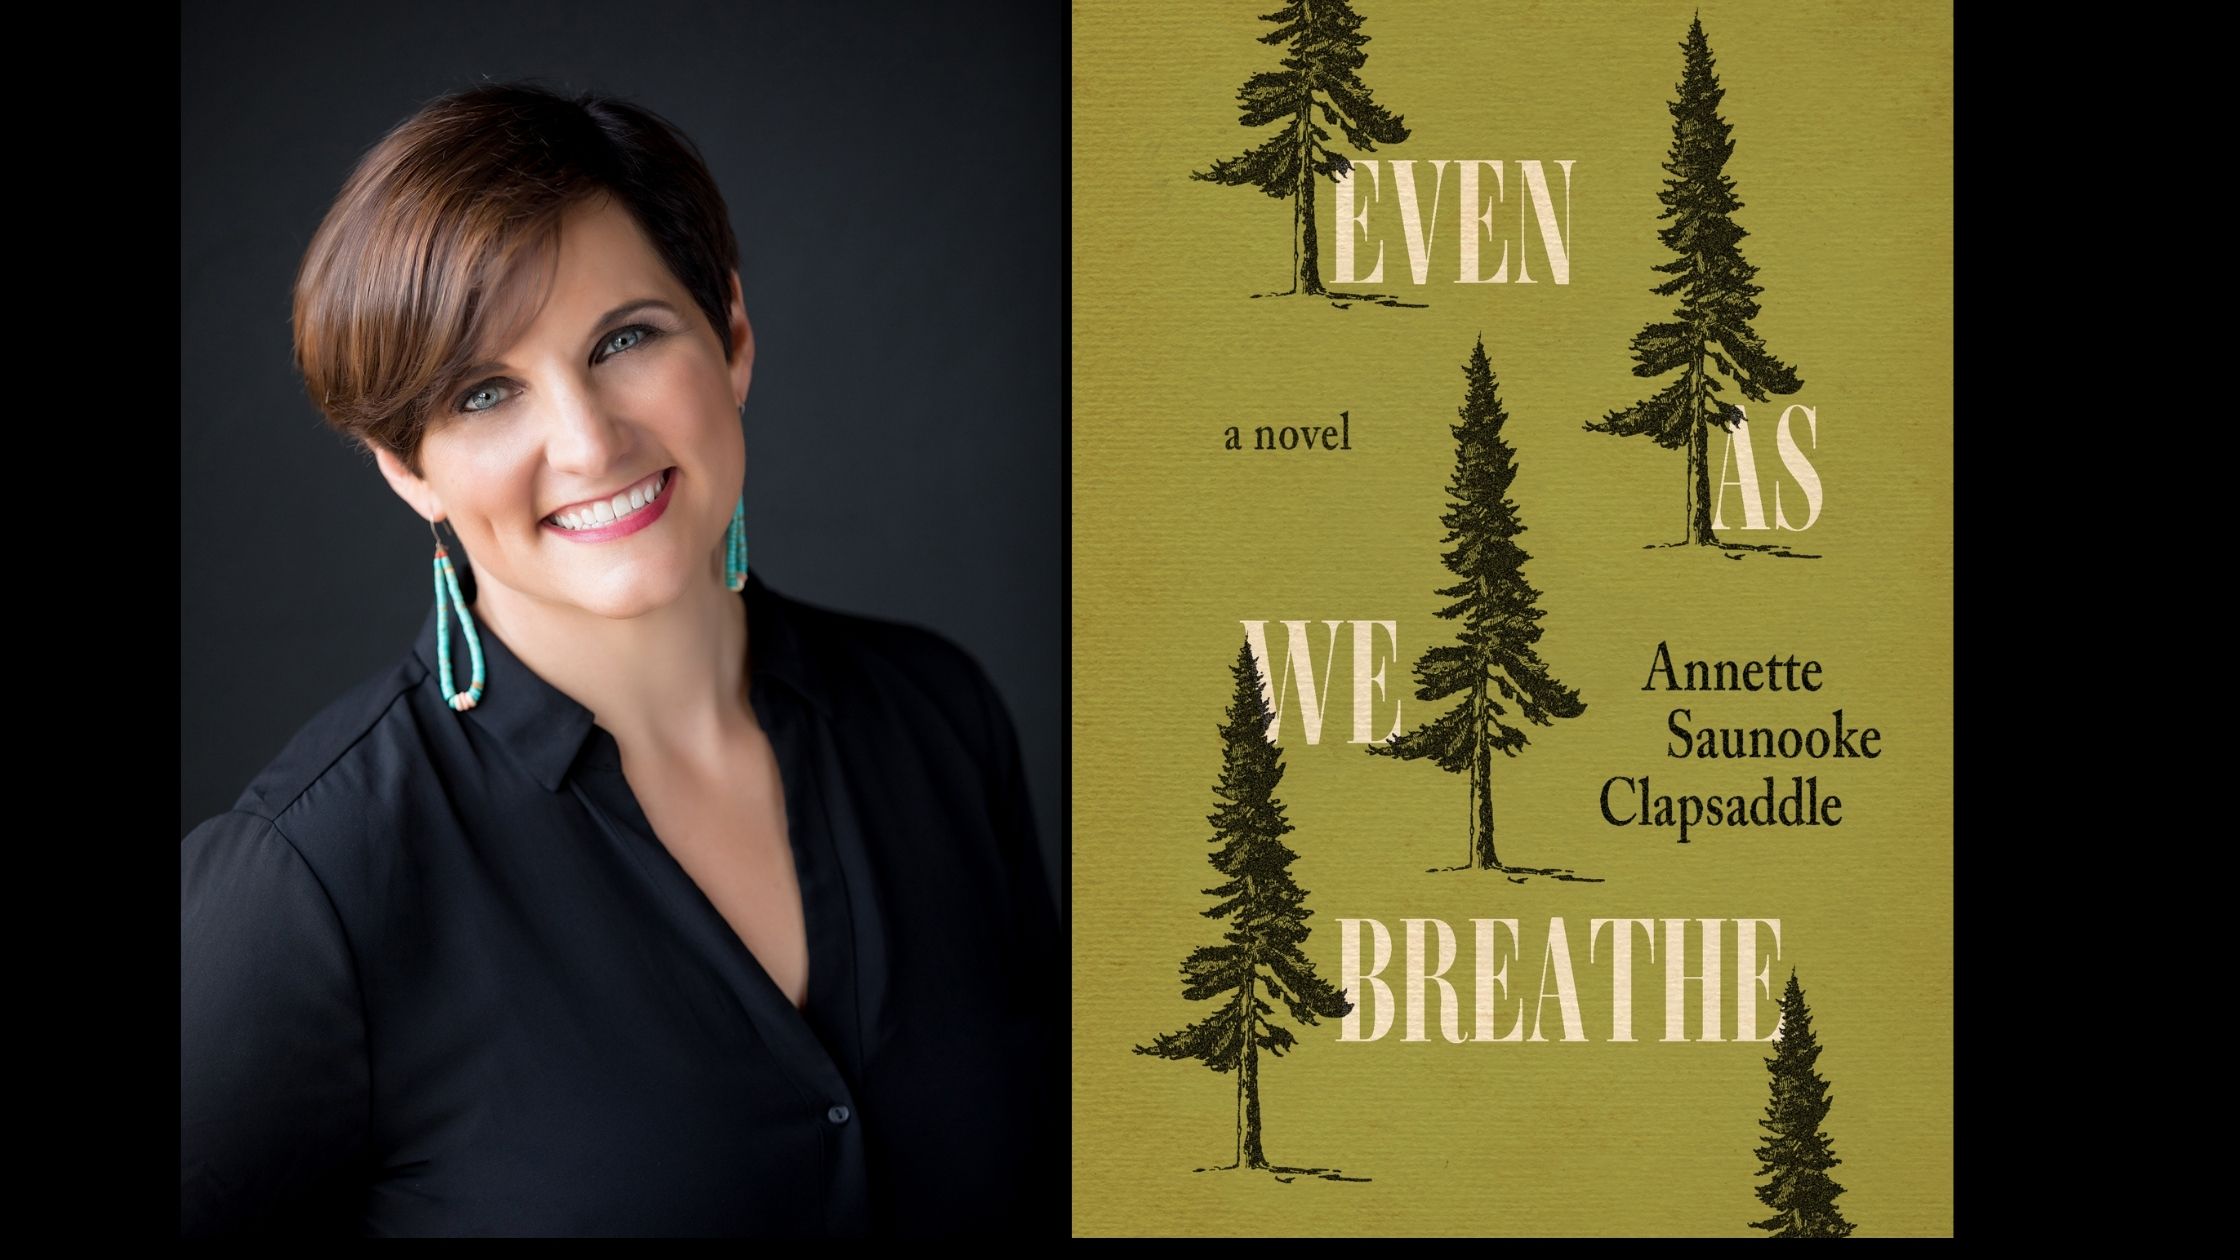 even as we breathe annette clapsaddle